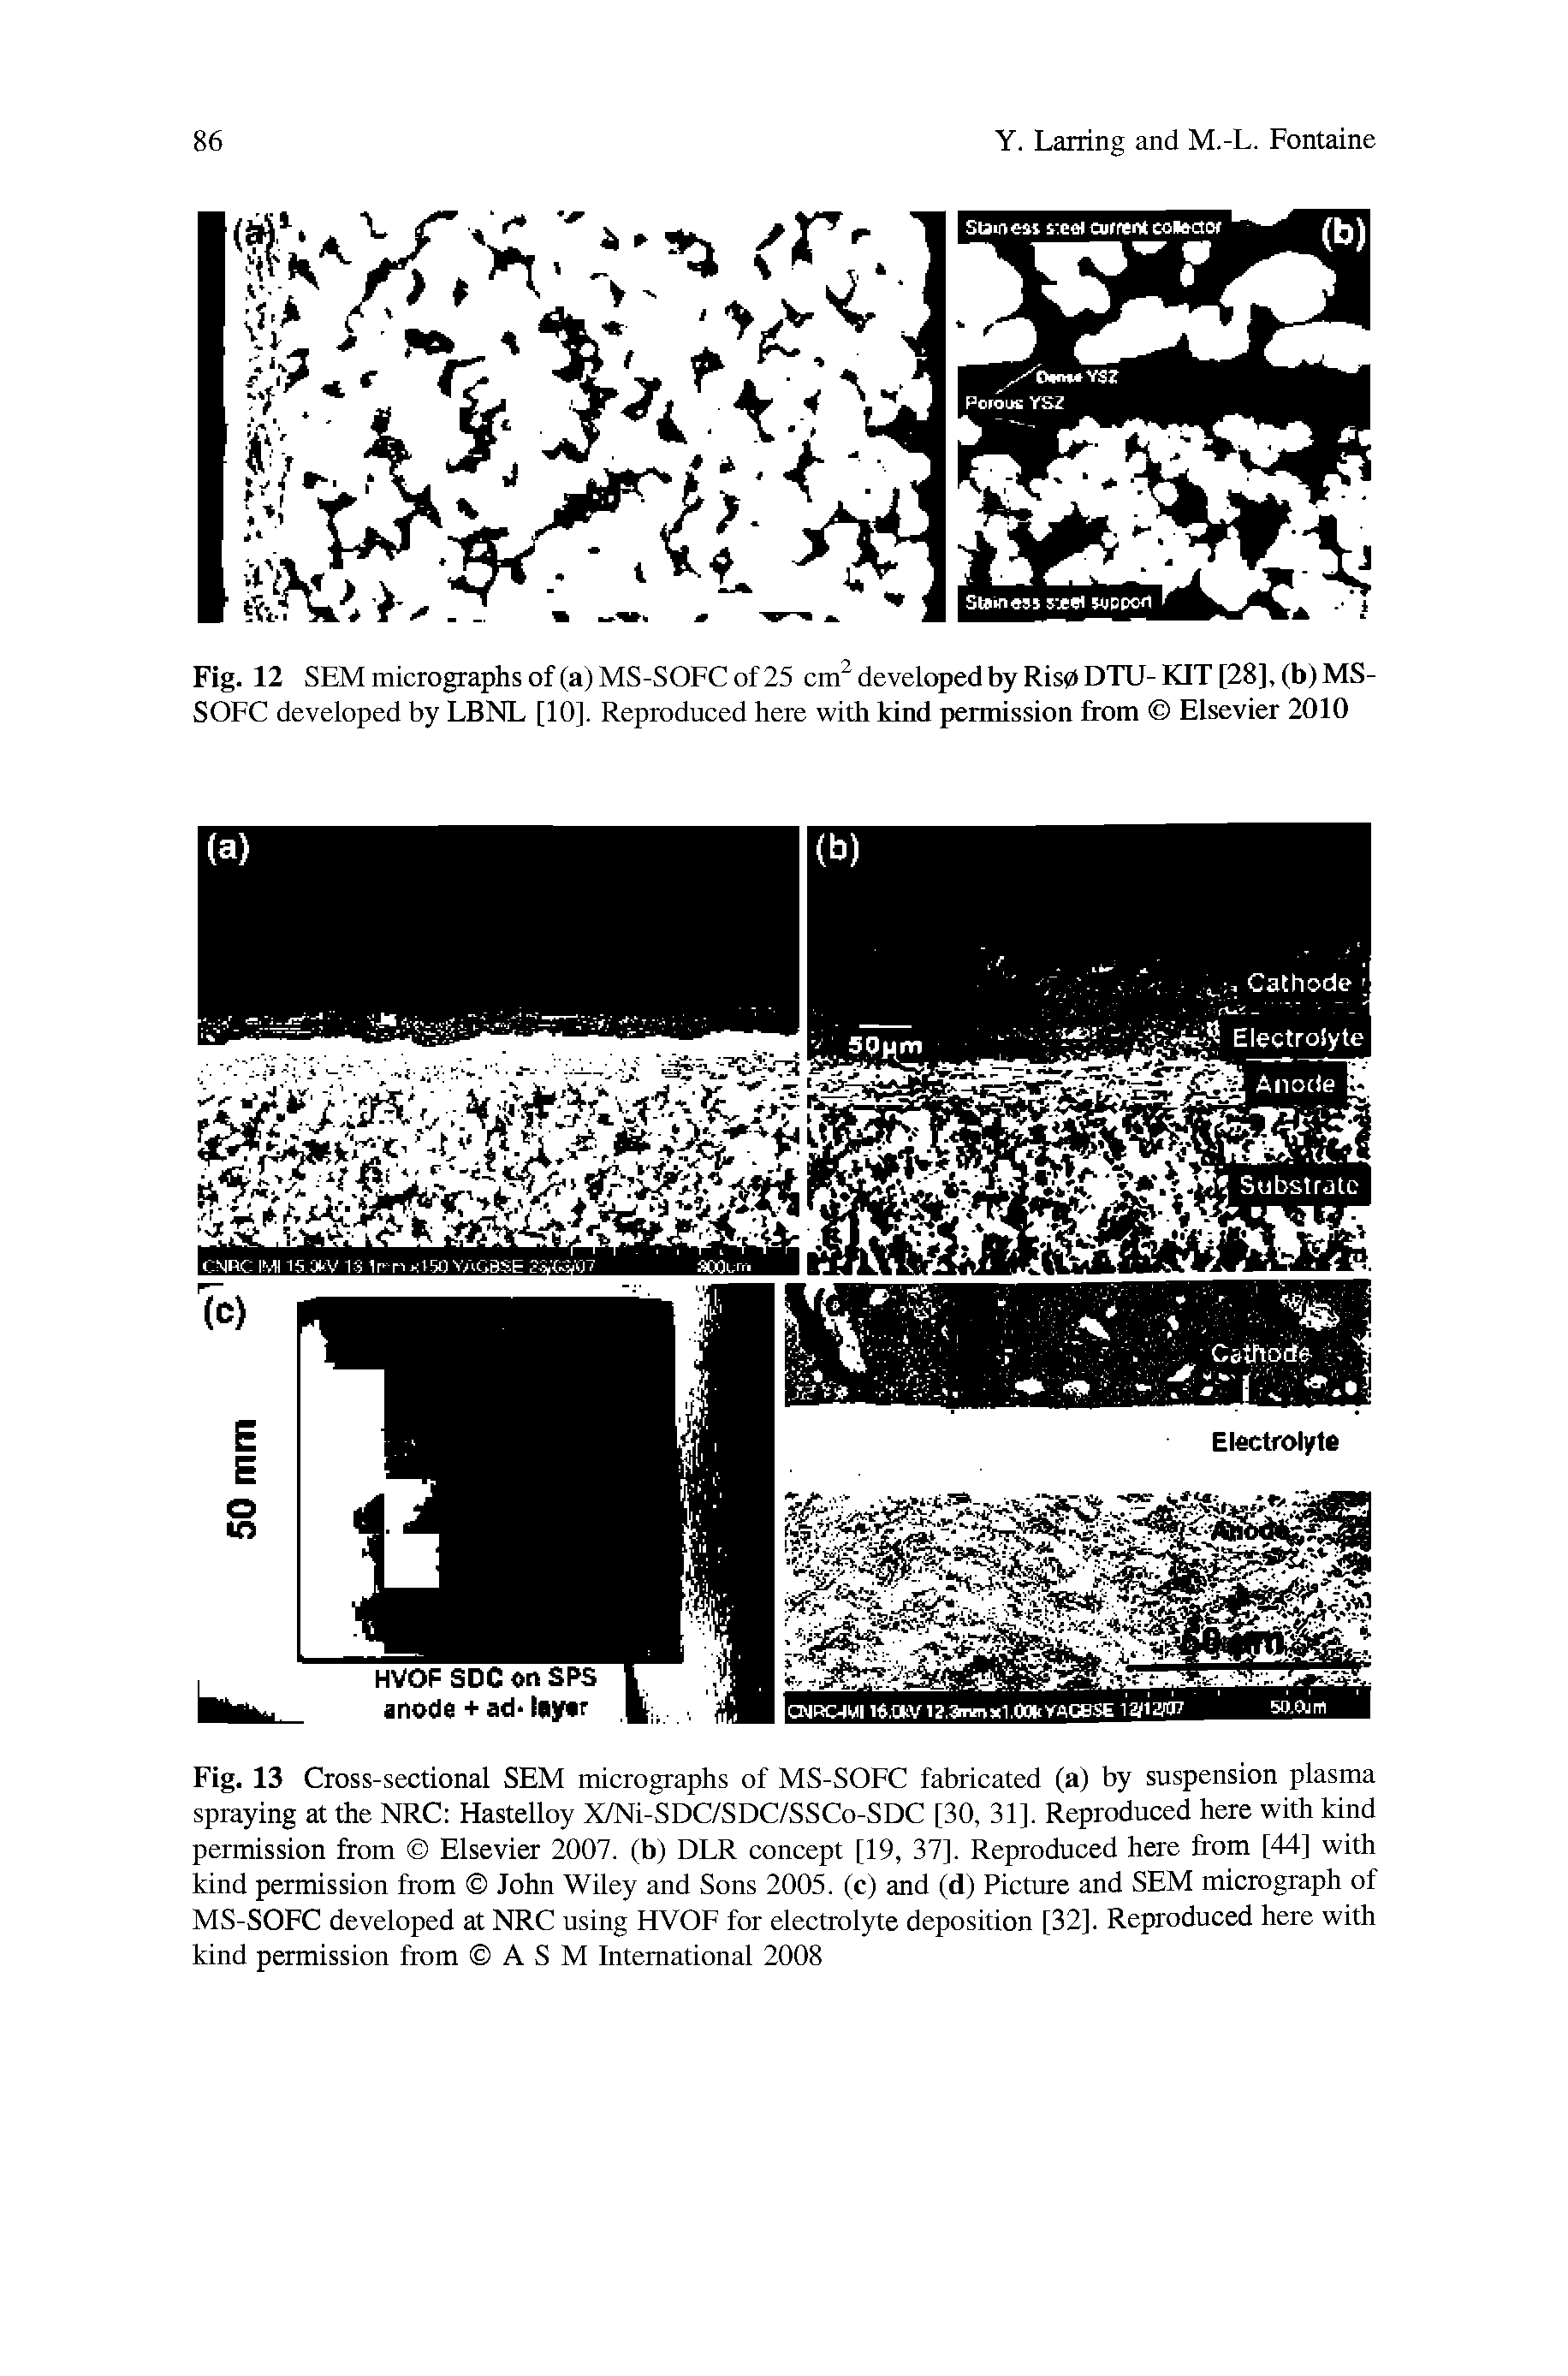 Fig. 13 Cross-sectional SEM micrographs of MS-SOFC fabricated (a) by suspension plasma spraying at the NRC Hastelloy X/Ni-SDC/SDC/SSCo-SDC [30, 31], Reproduced here with kind permission from Elsevier 2007. (b) DLR concept [19, 37]. Reproduced here from [44] with kind permission from John Wiley and Sons 2005. (c) and (d) Picture and SEM micrograph of MS-SOFC developed at NRC using HVOF for electrolyte deposition [32]. Reproduced here with kind permission from ASM International 2008...